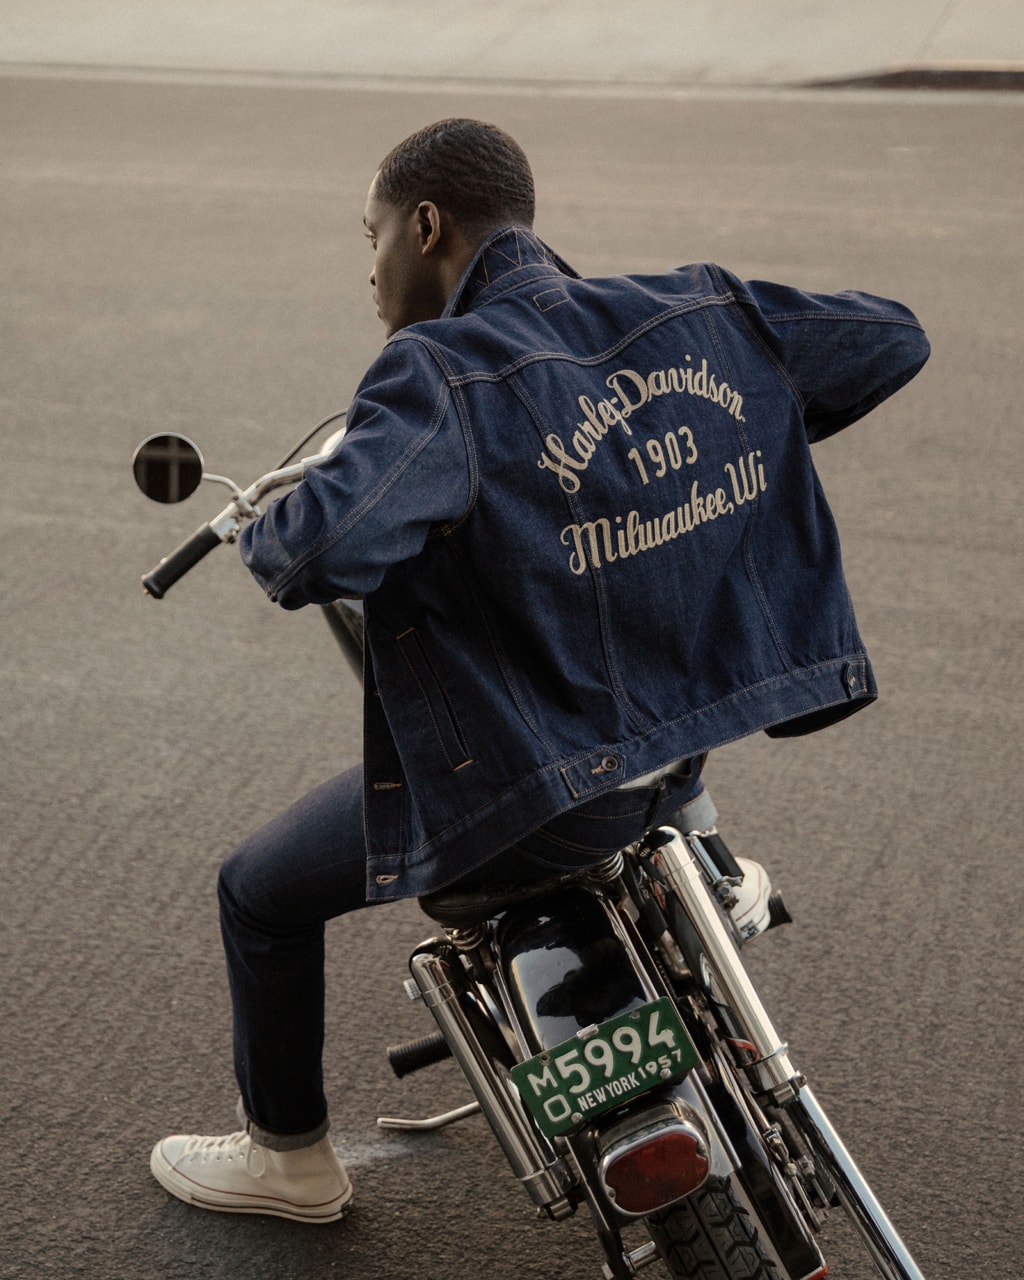 Harley-Davidson x Todd Snyder Launch a New Apparel Collection